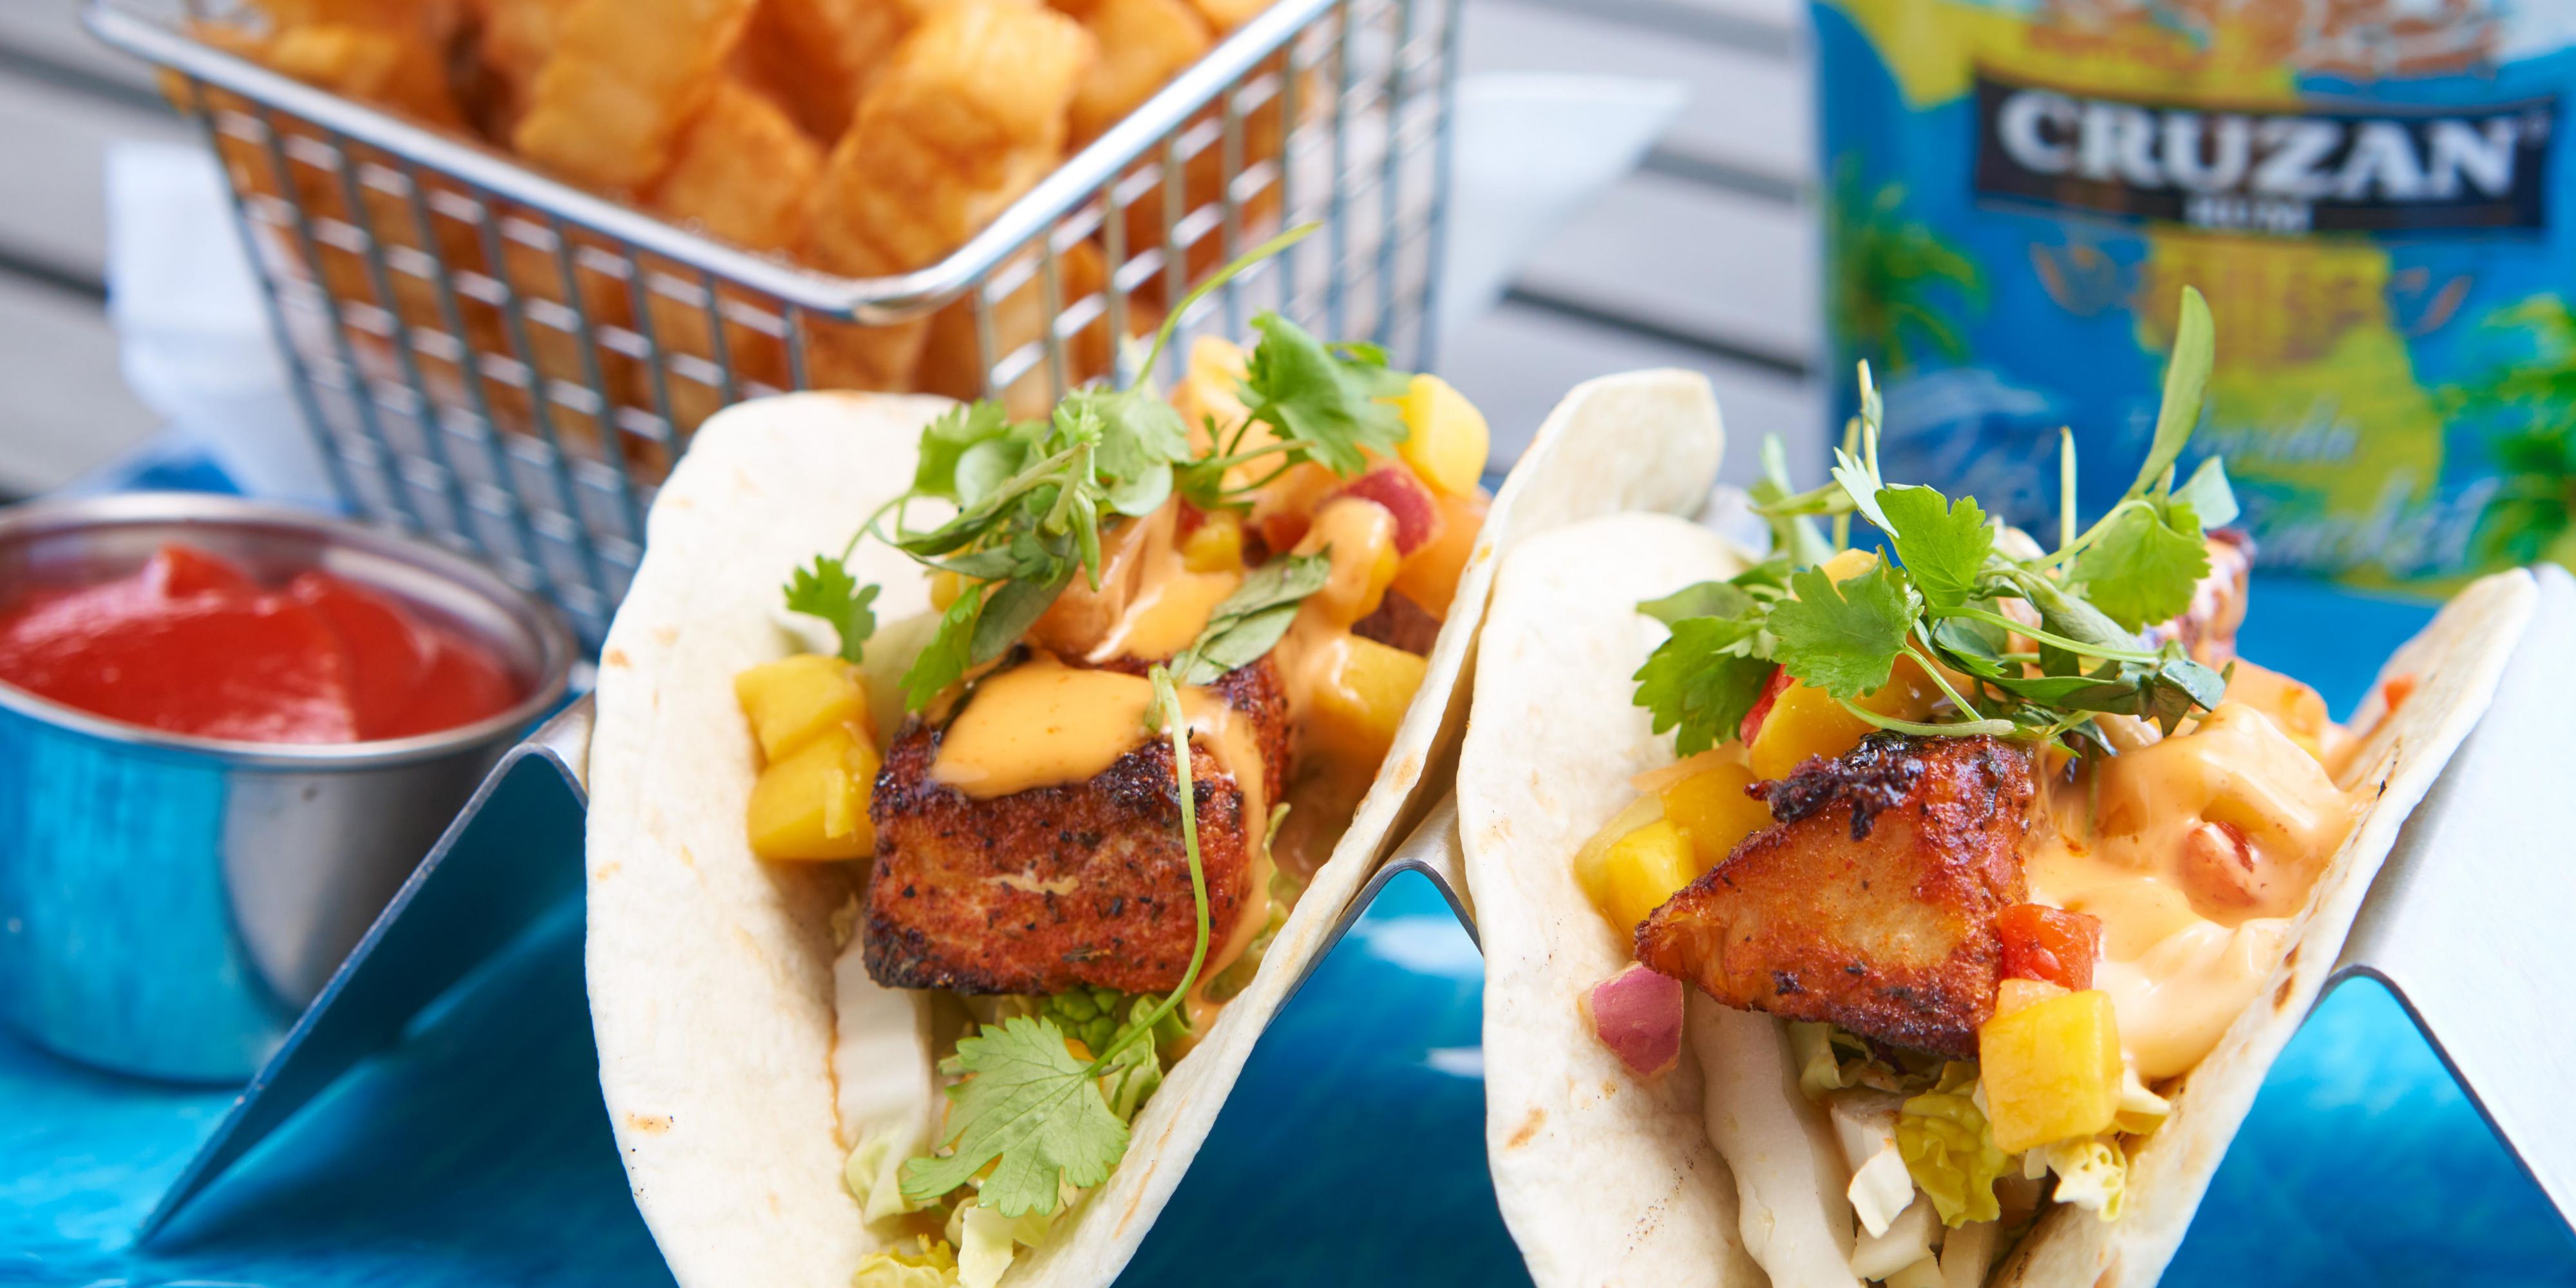 A must-try Blackened Mahi Tacos from our restaurant.